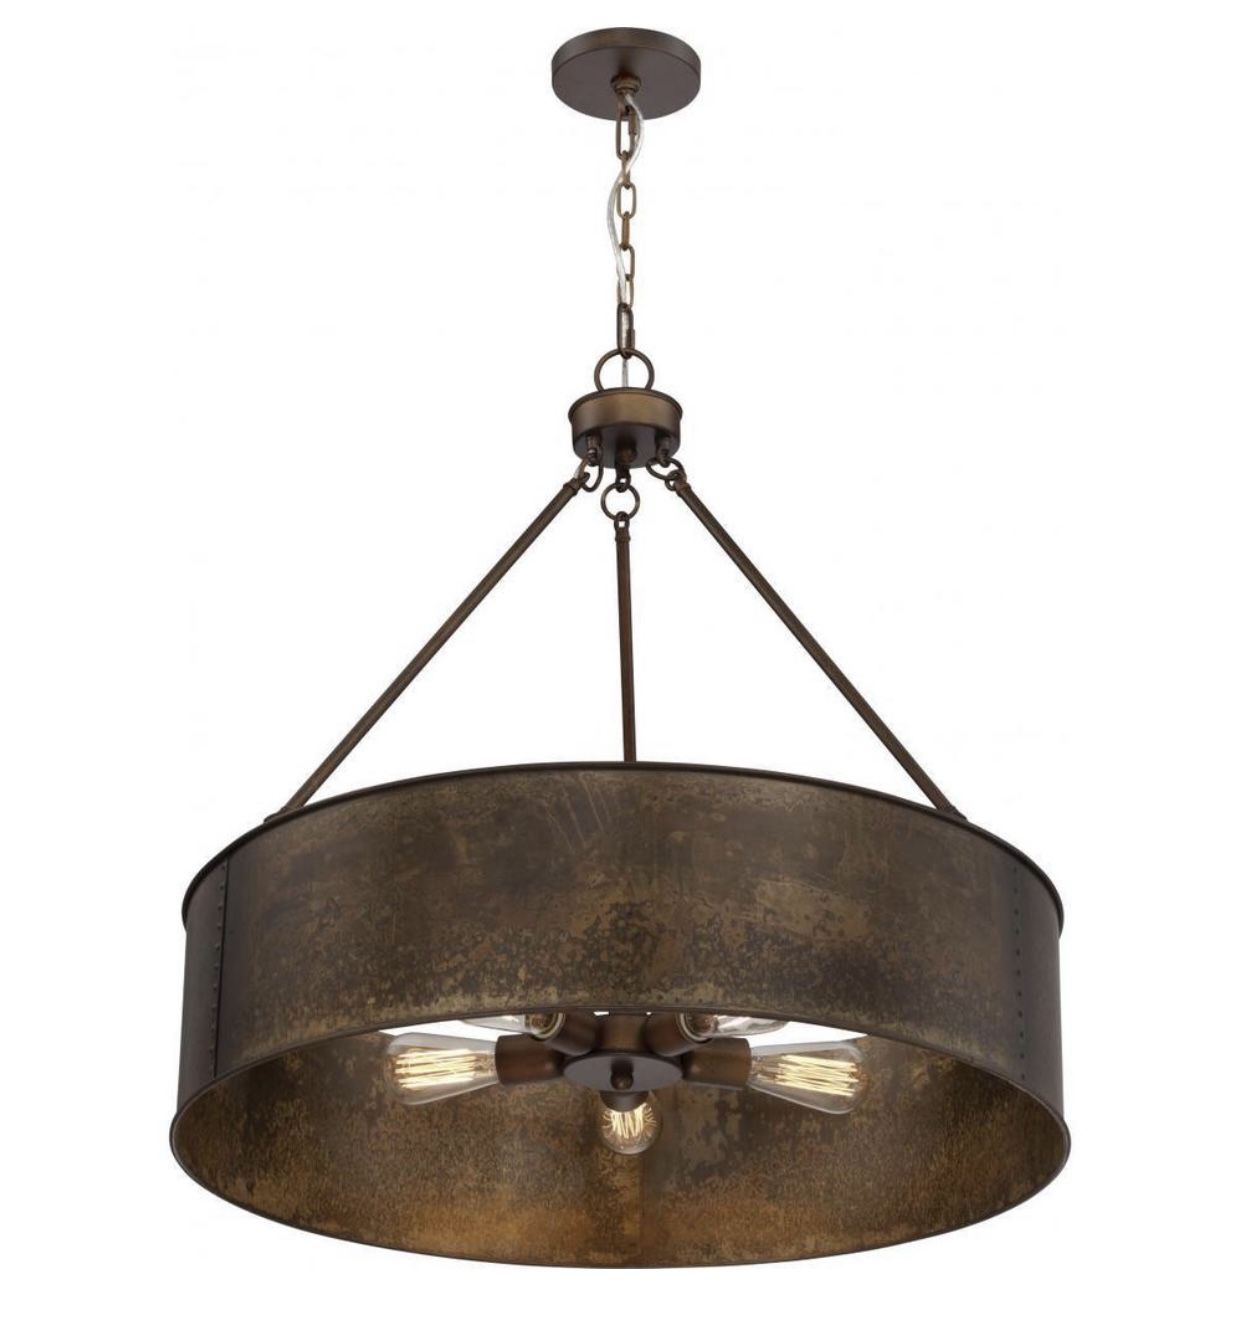 Nuvo Lighting Kettle Antique Copper Finish 5-light Oversized Pendant - Diameter 30.00", Height 28" - Diameter 30.00", Height 28". MSRP $442. Our price